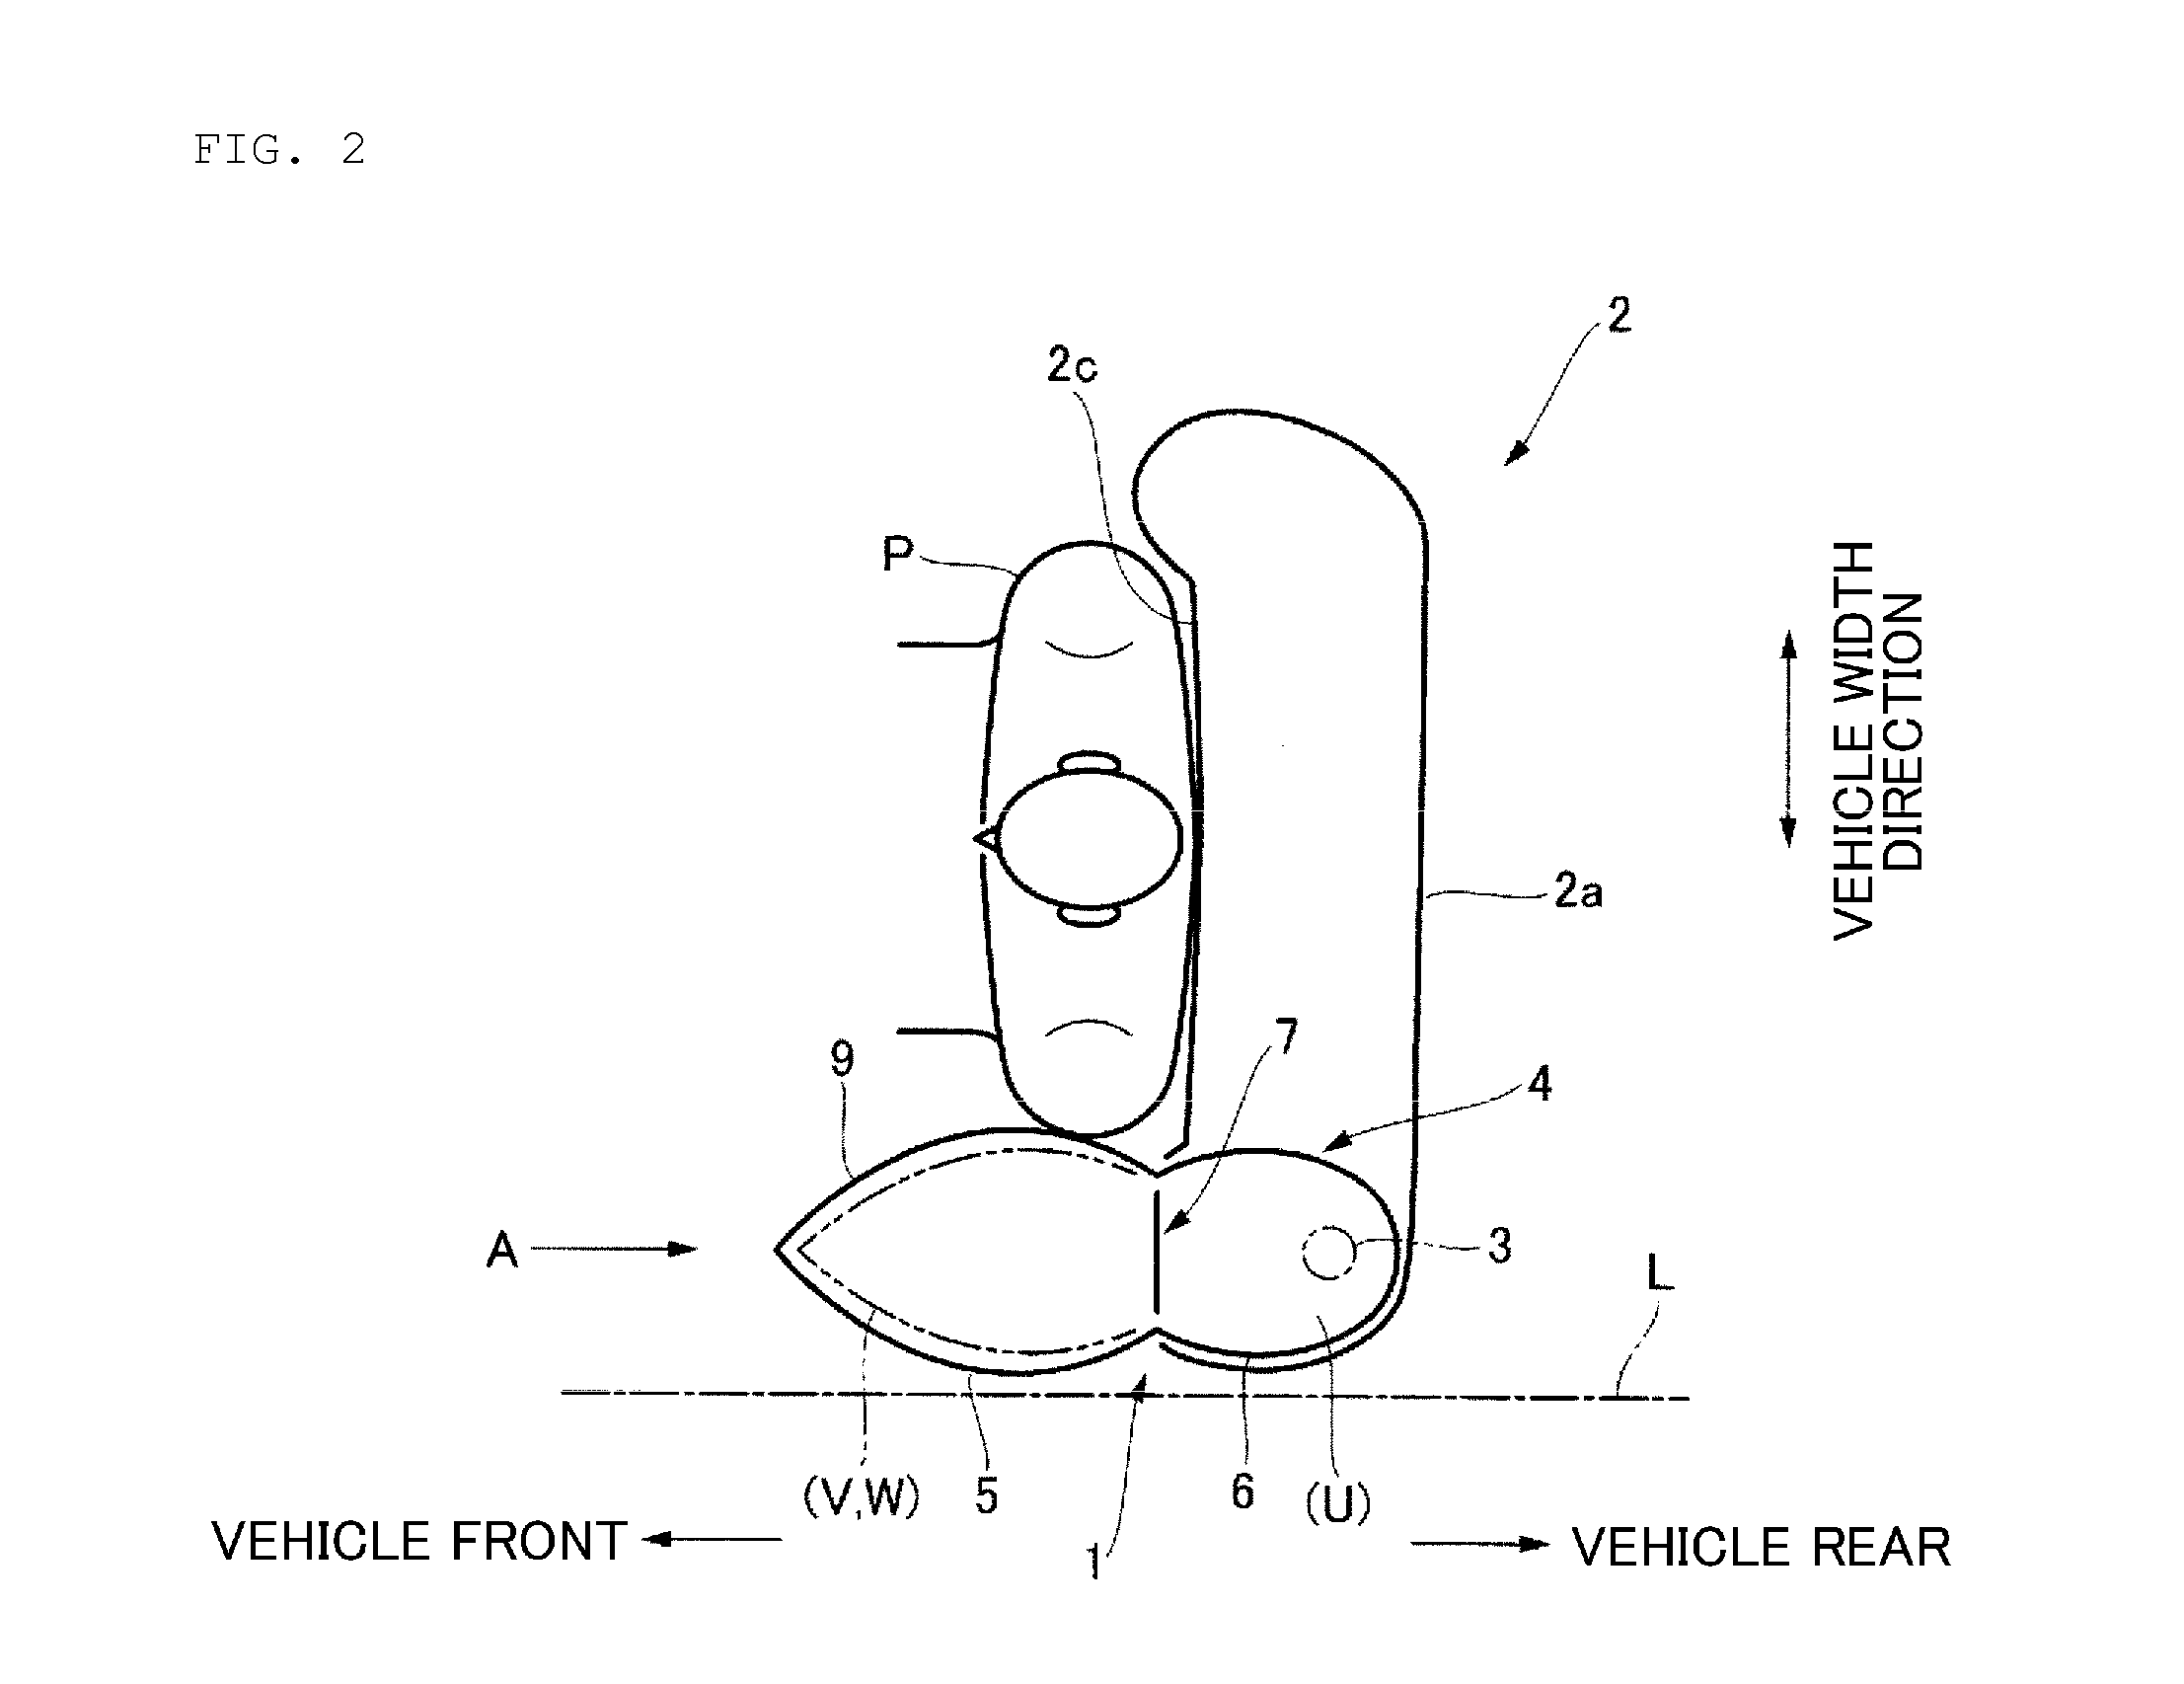 Vehicular Side Airbag Device